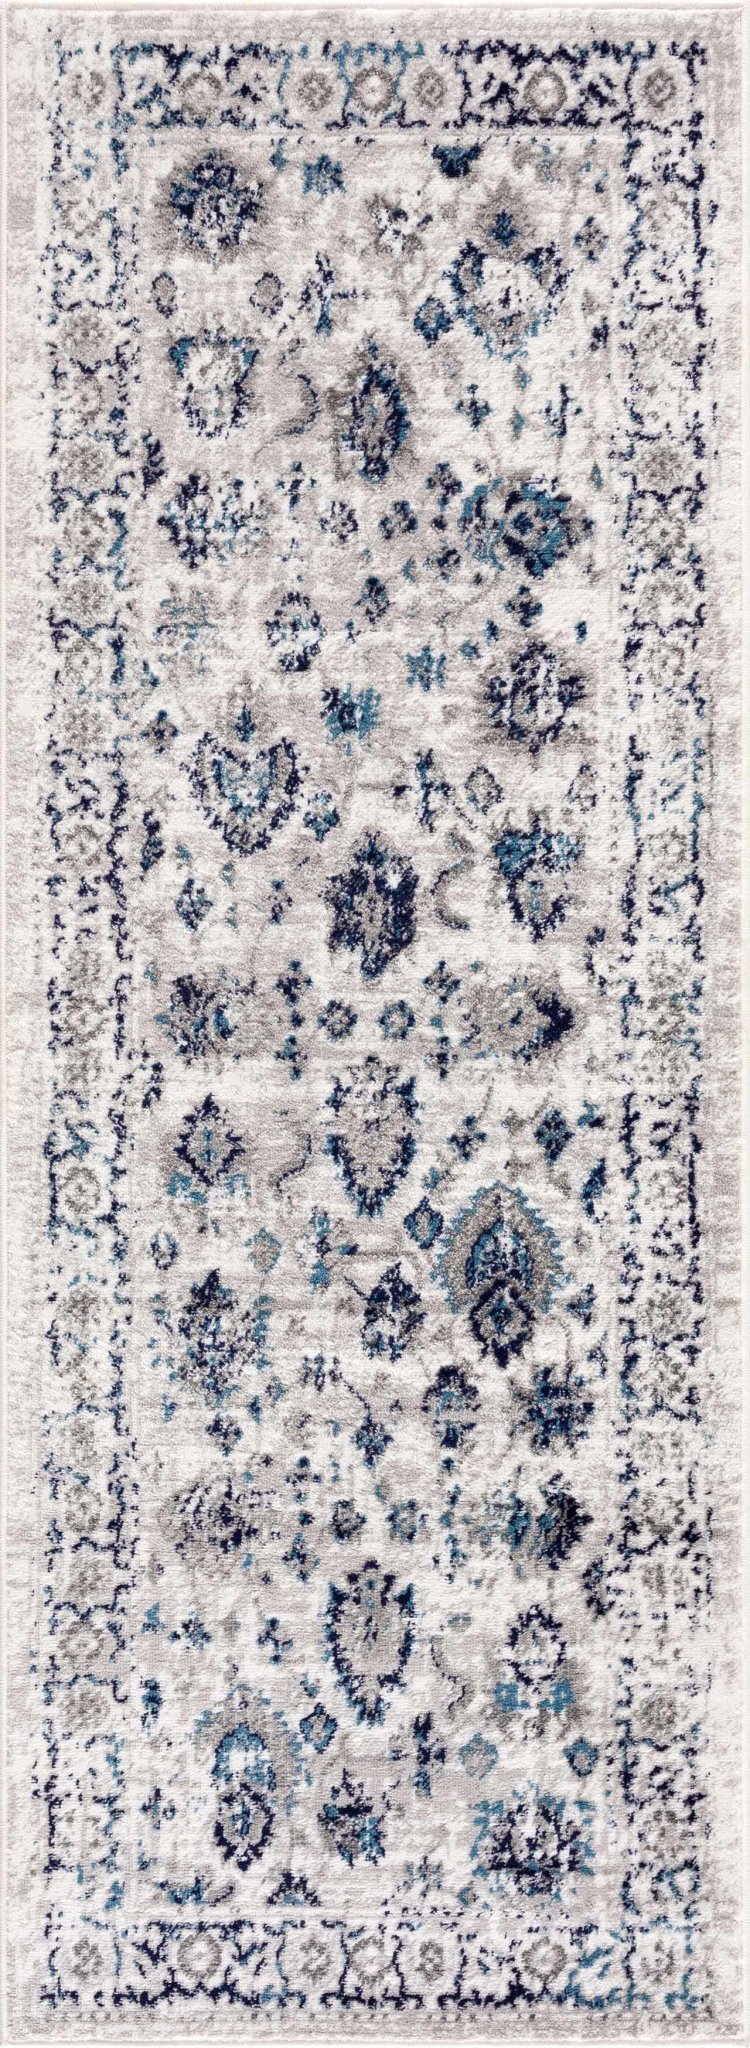 Silver, Gray, Teal and Charcoal Traditional Oushak Design Area Rug - The Rug Decor